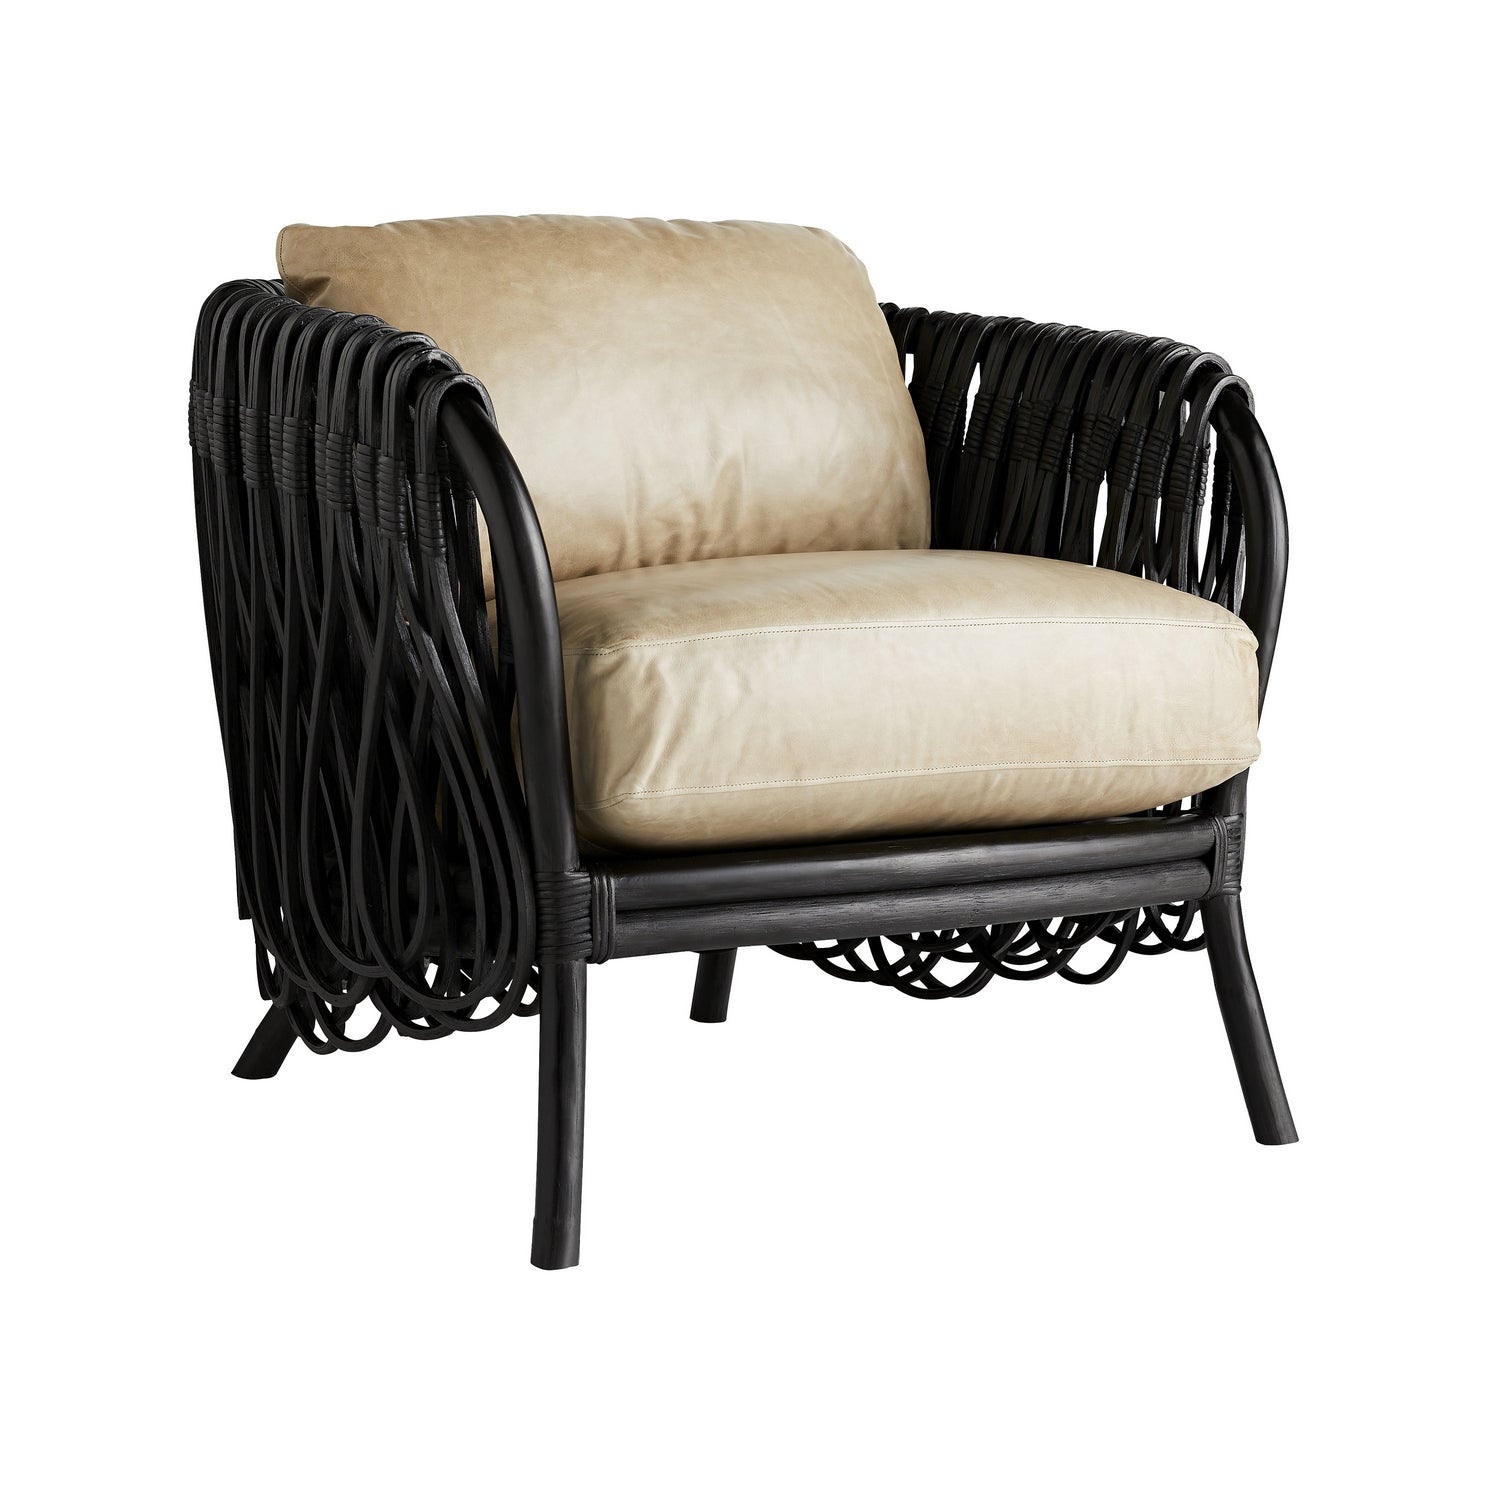 Lounge Chair from the Strata collection in Black finish